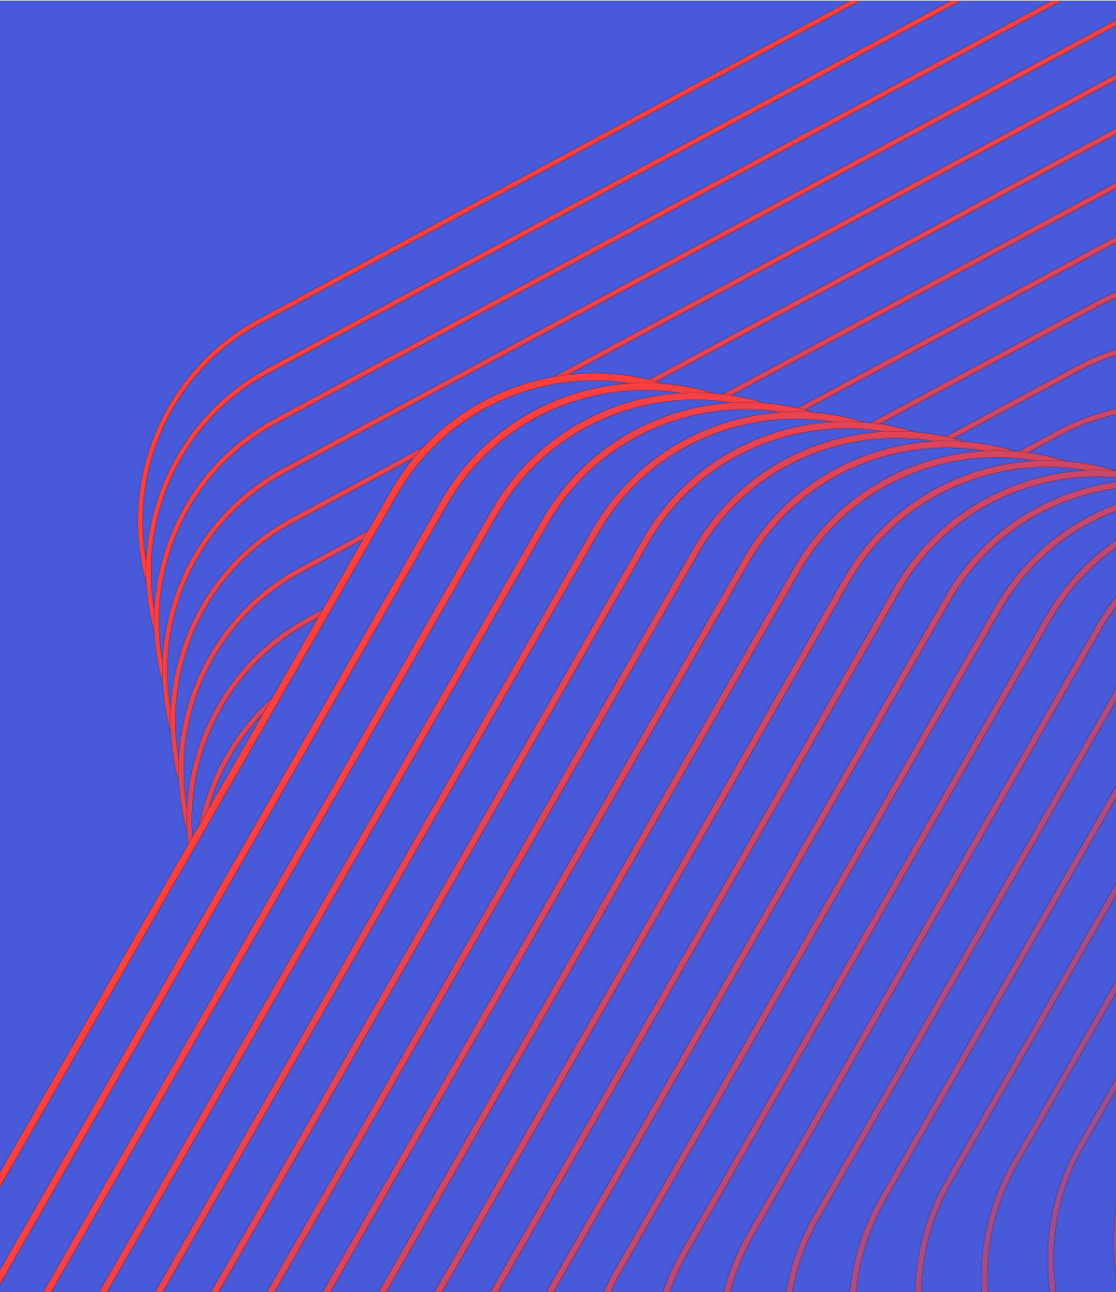 A digital rendering of red parallel lines that bend and curve over an indigo background.